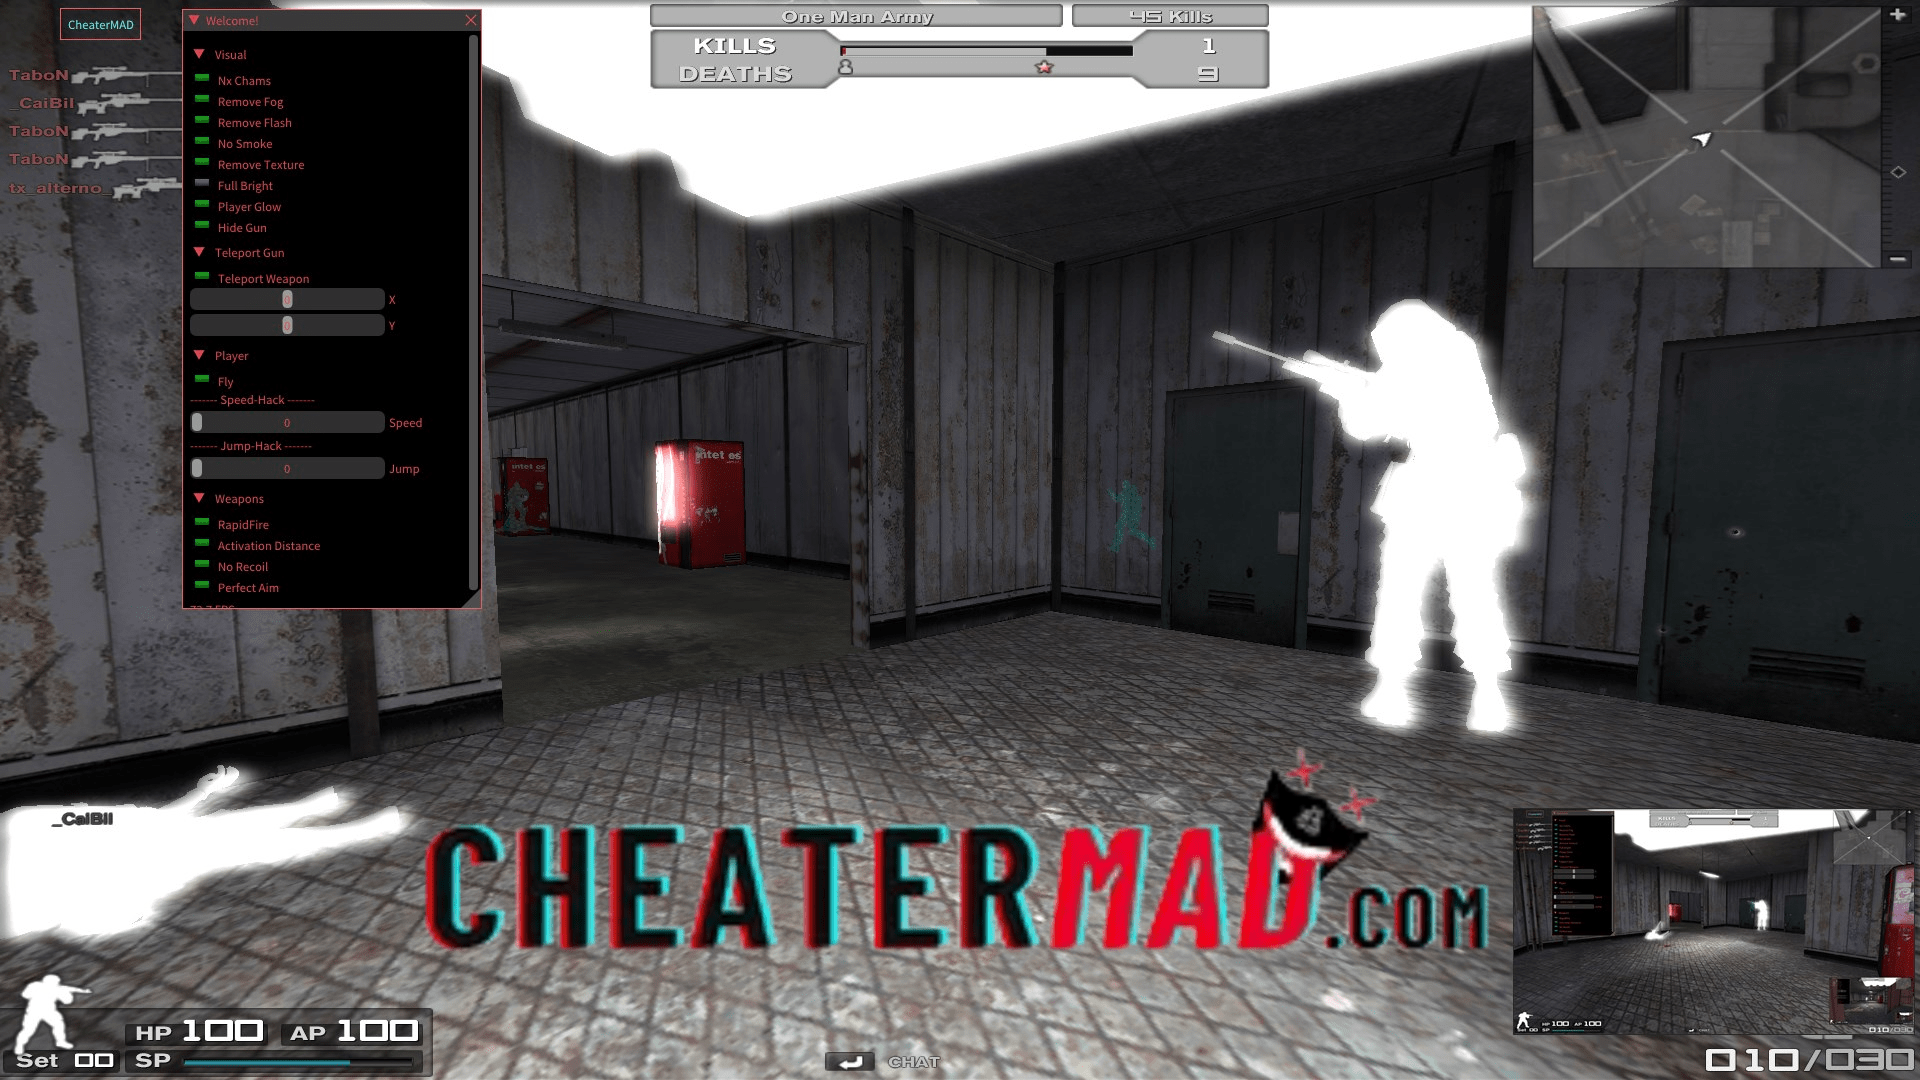 Free Updated Cheats And Hacks Download Site Cheatermad Com - roblox cs go hack download